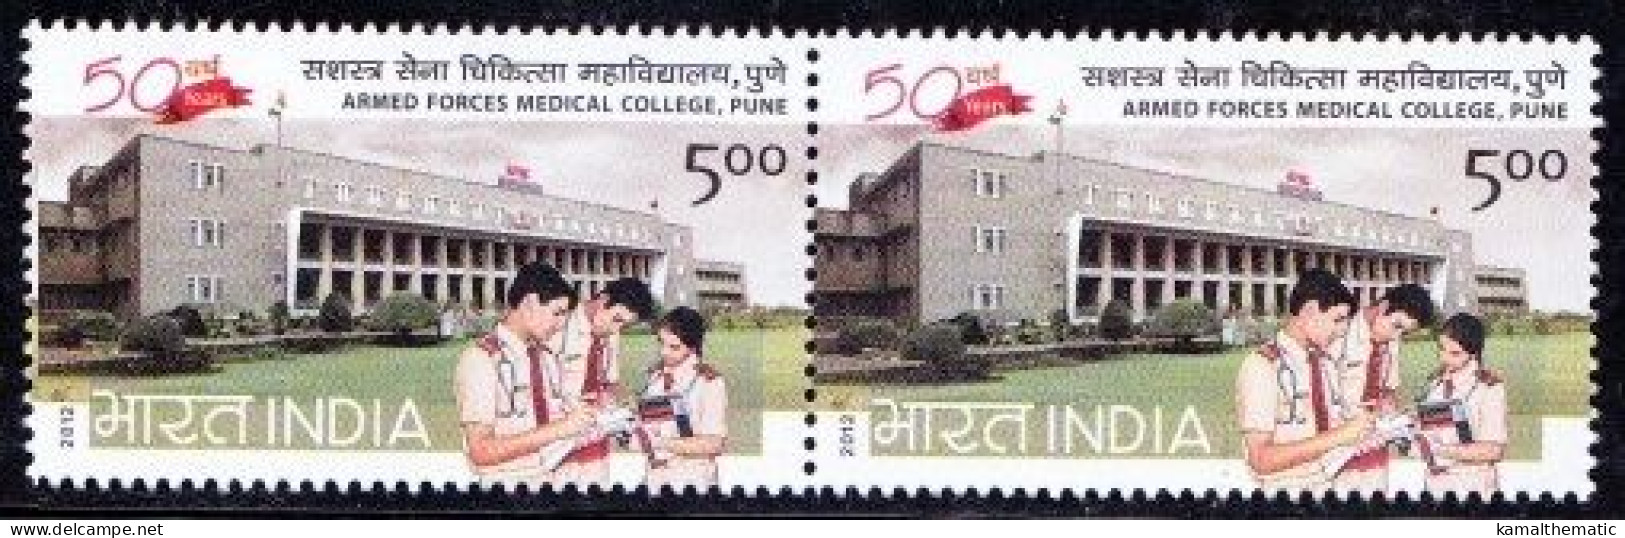 India 2012 MNH Pair, Armed Forces, Medical College, Stethoscope, - Medicine